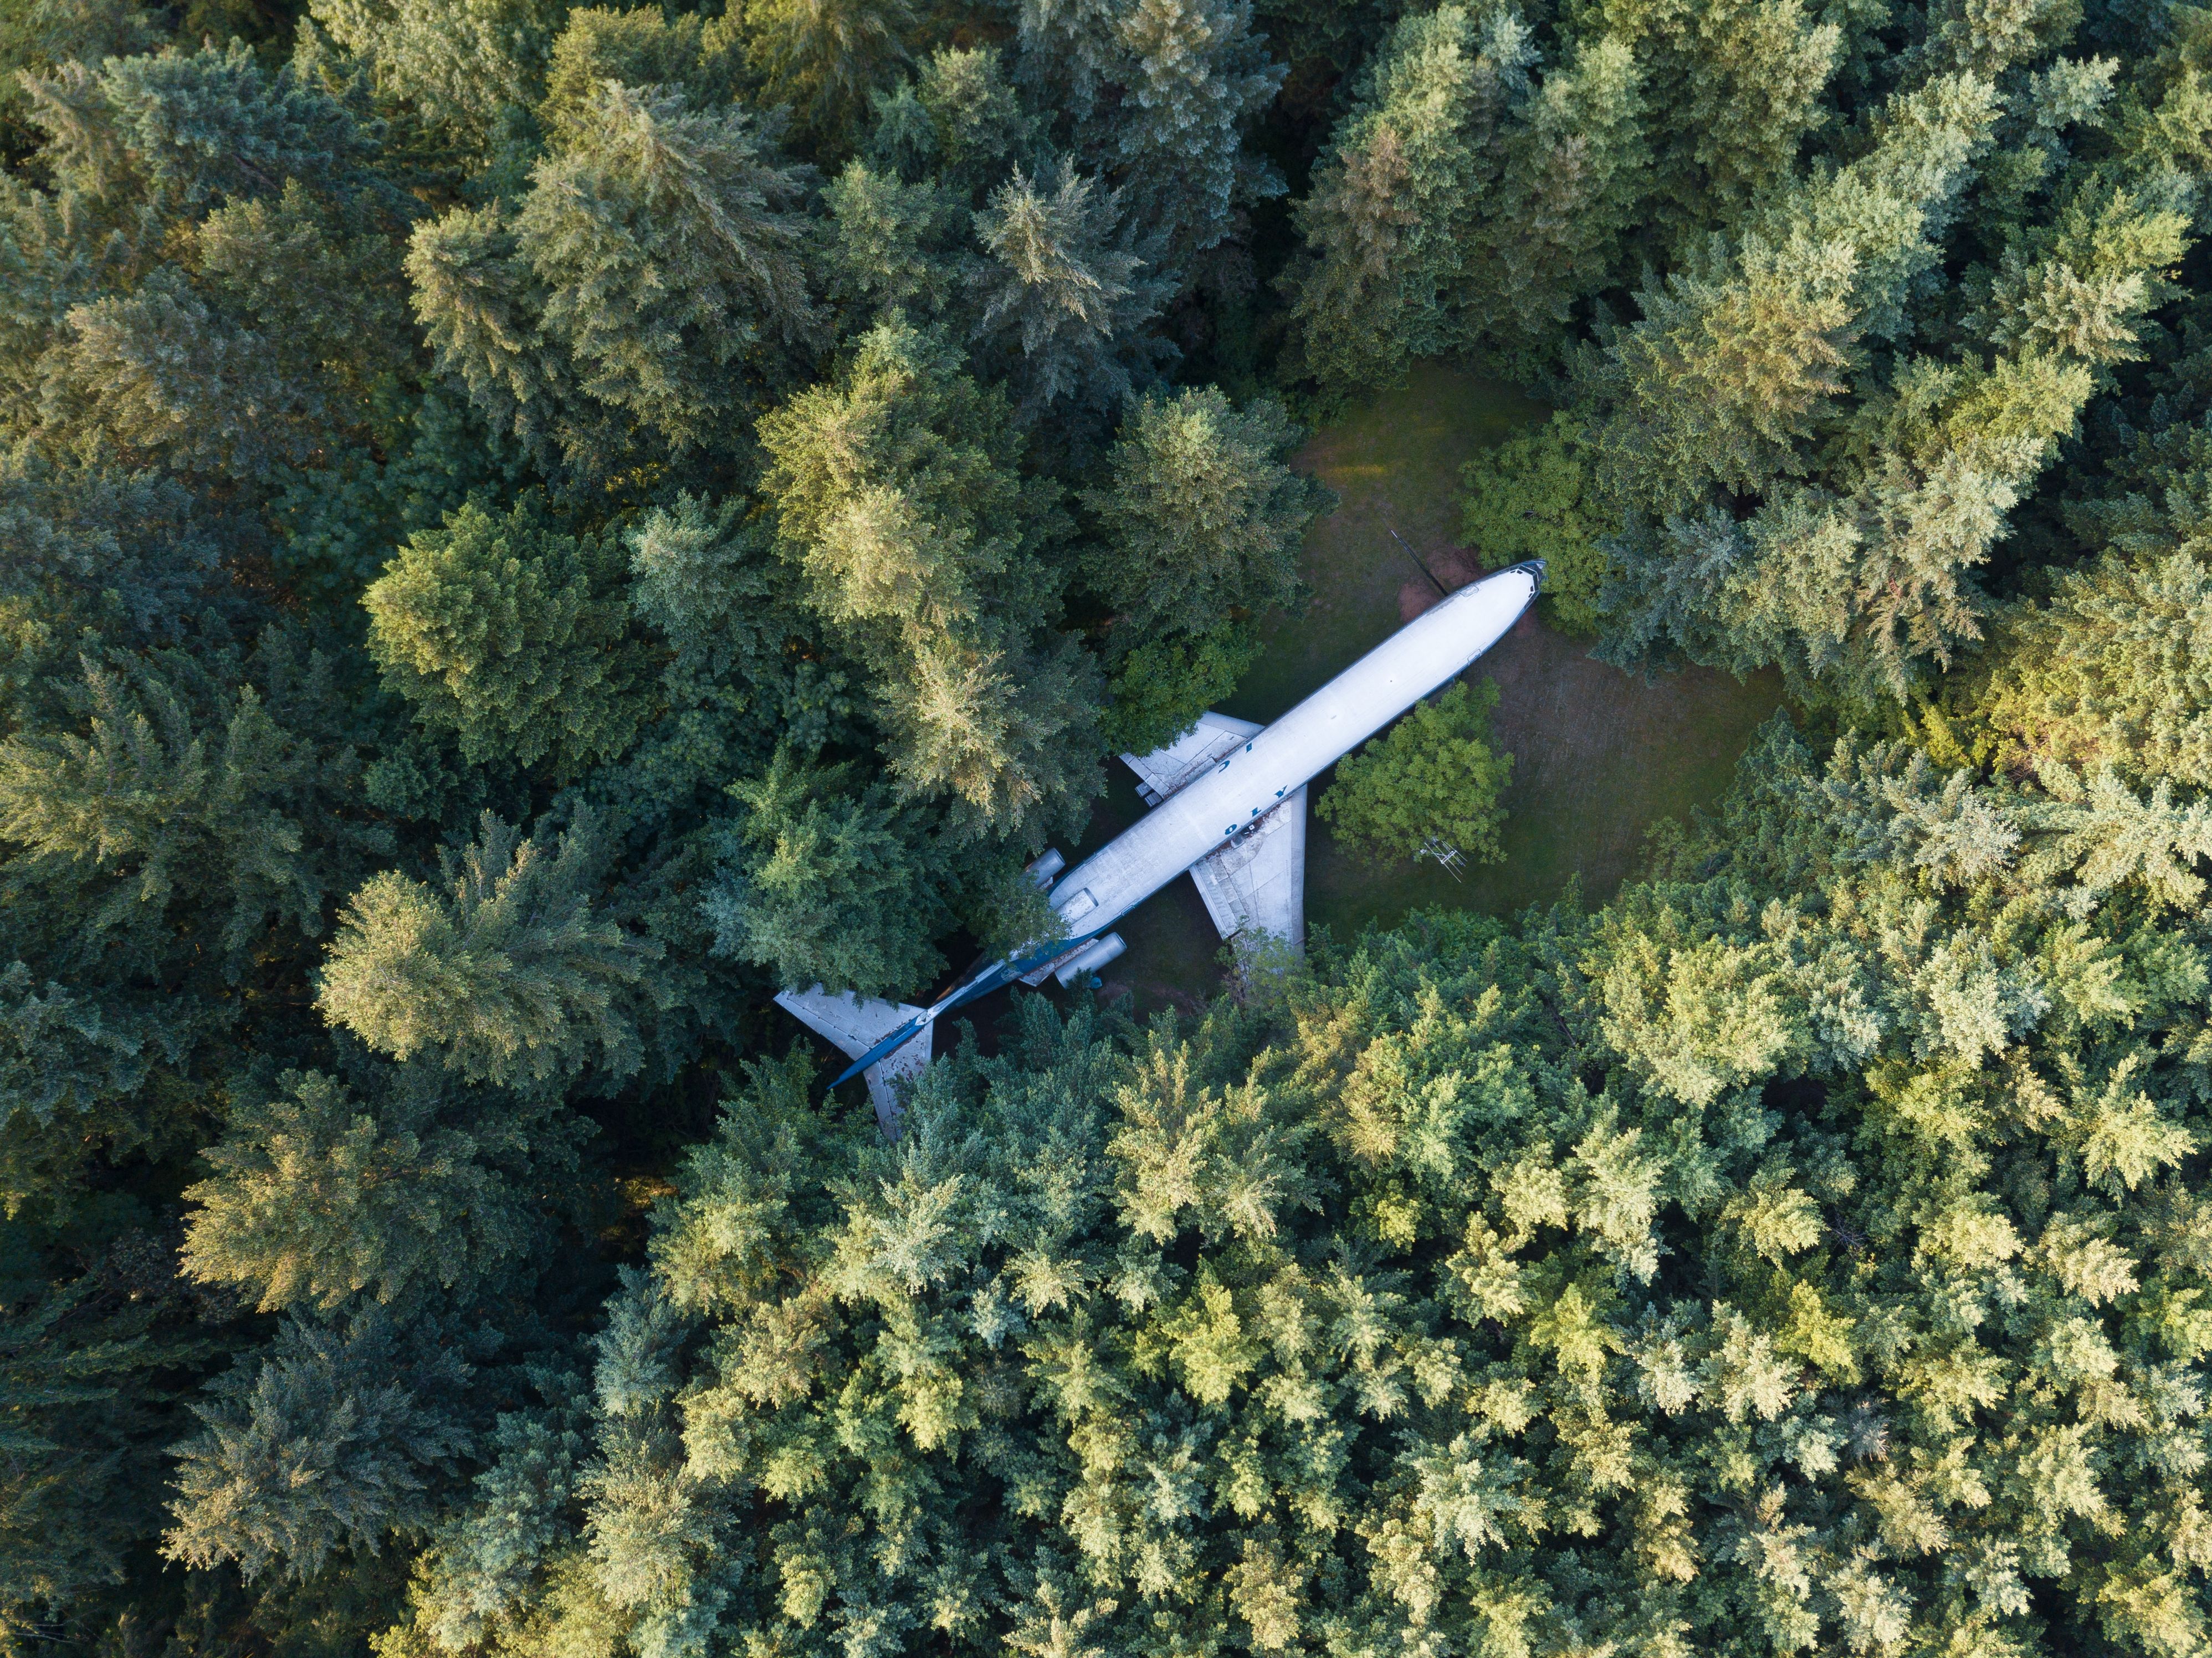 A Boeing 727 in the middle of a forest.